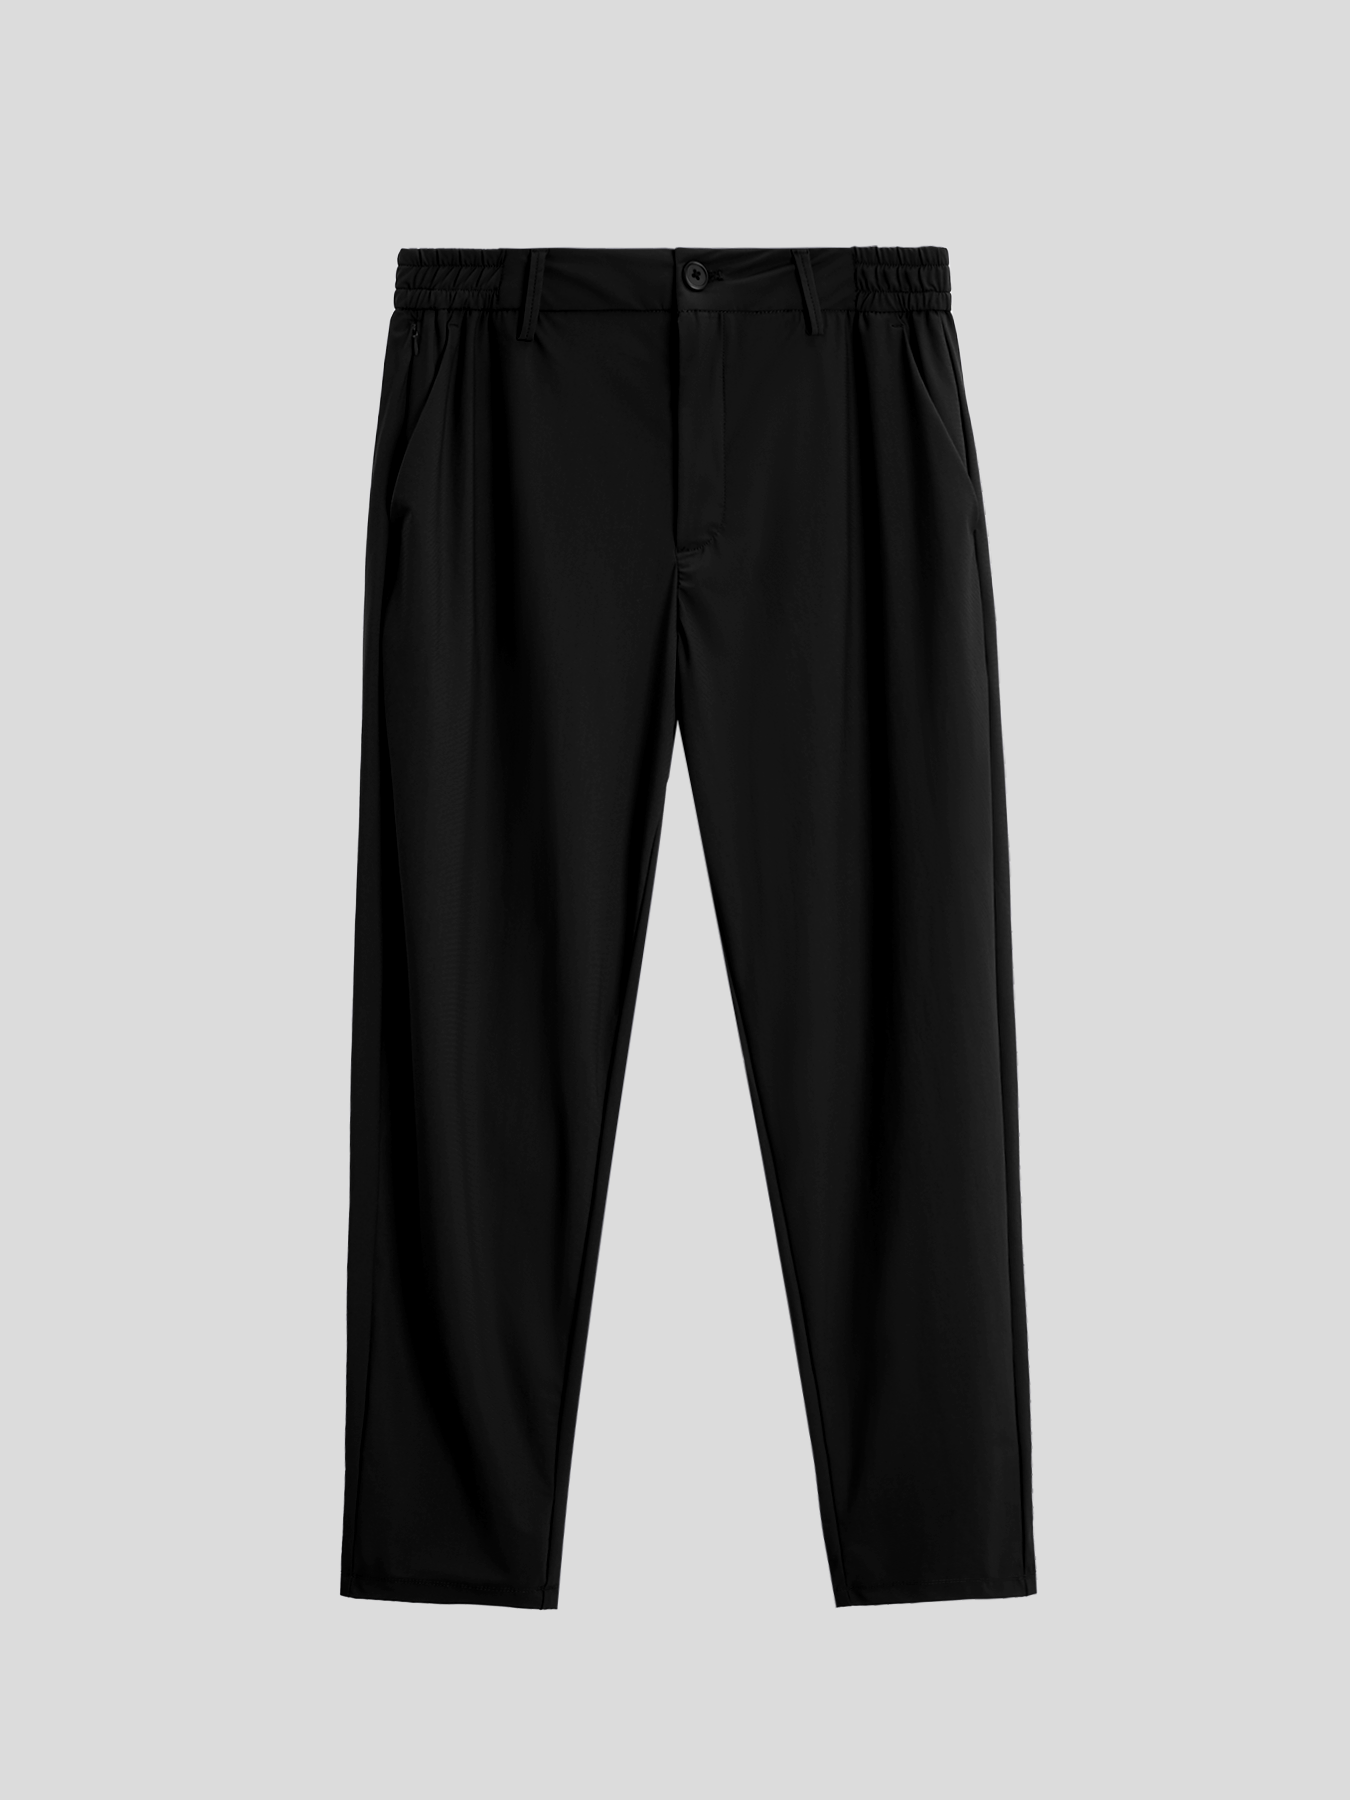 ChillLux Wrinkle-free Stretch Pant